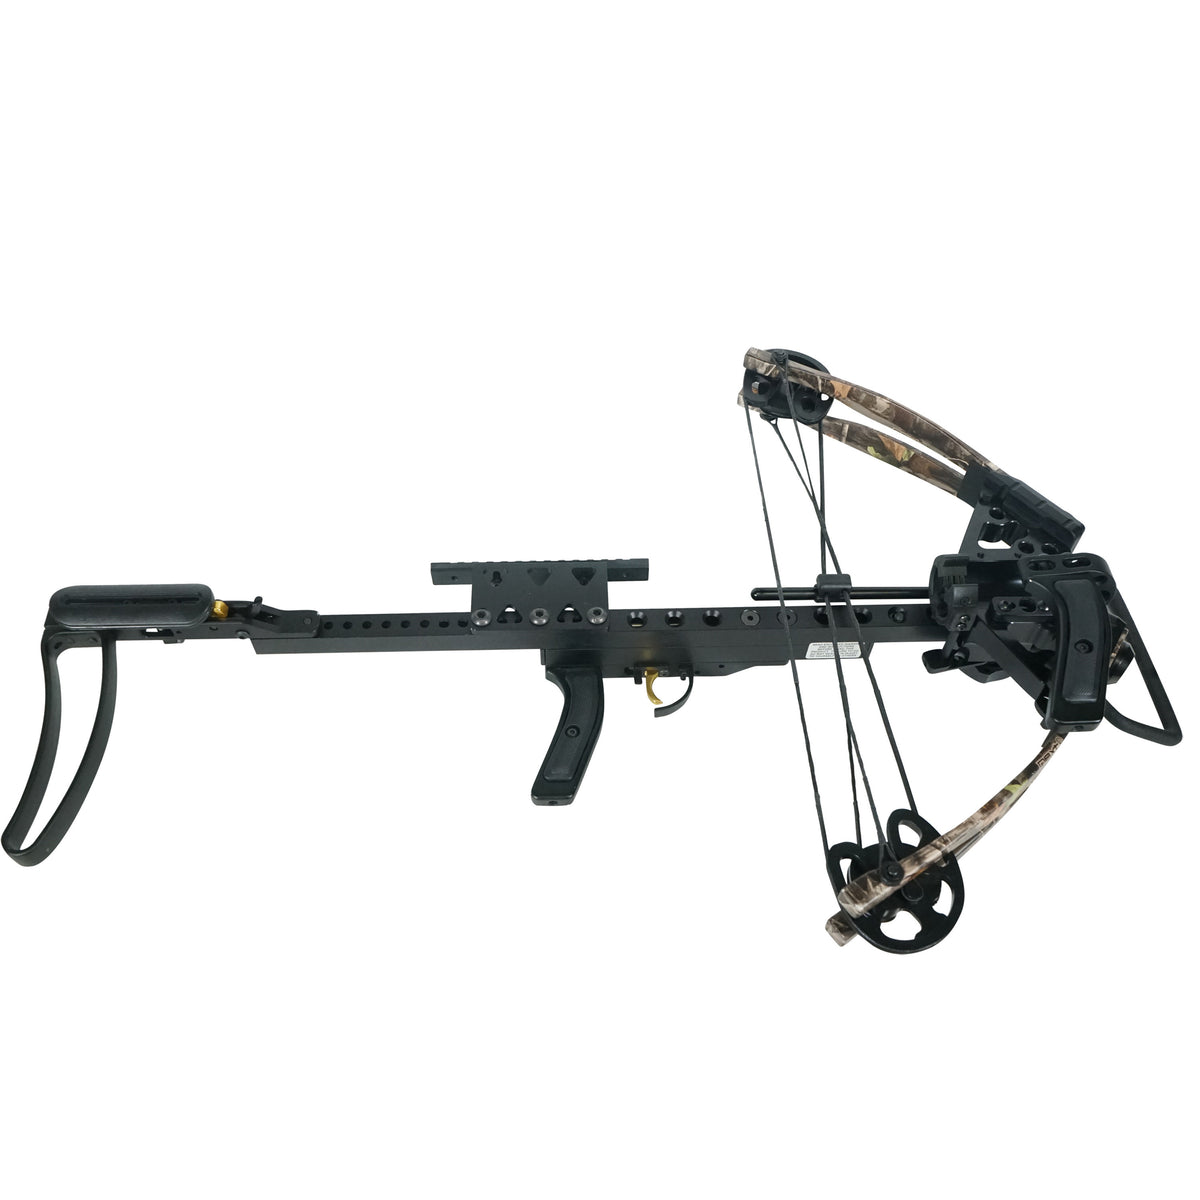 Hickory Creek 150 lbs In-Line Mini Vertical Crossbow w/ Split Limb & 4 —  /TheCrossbowStore.com